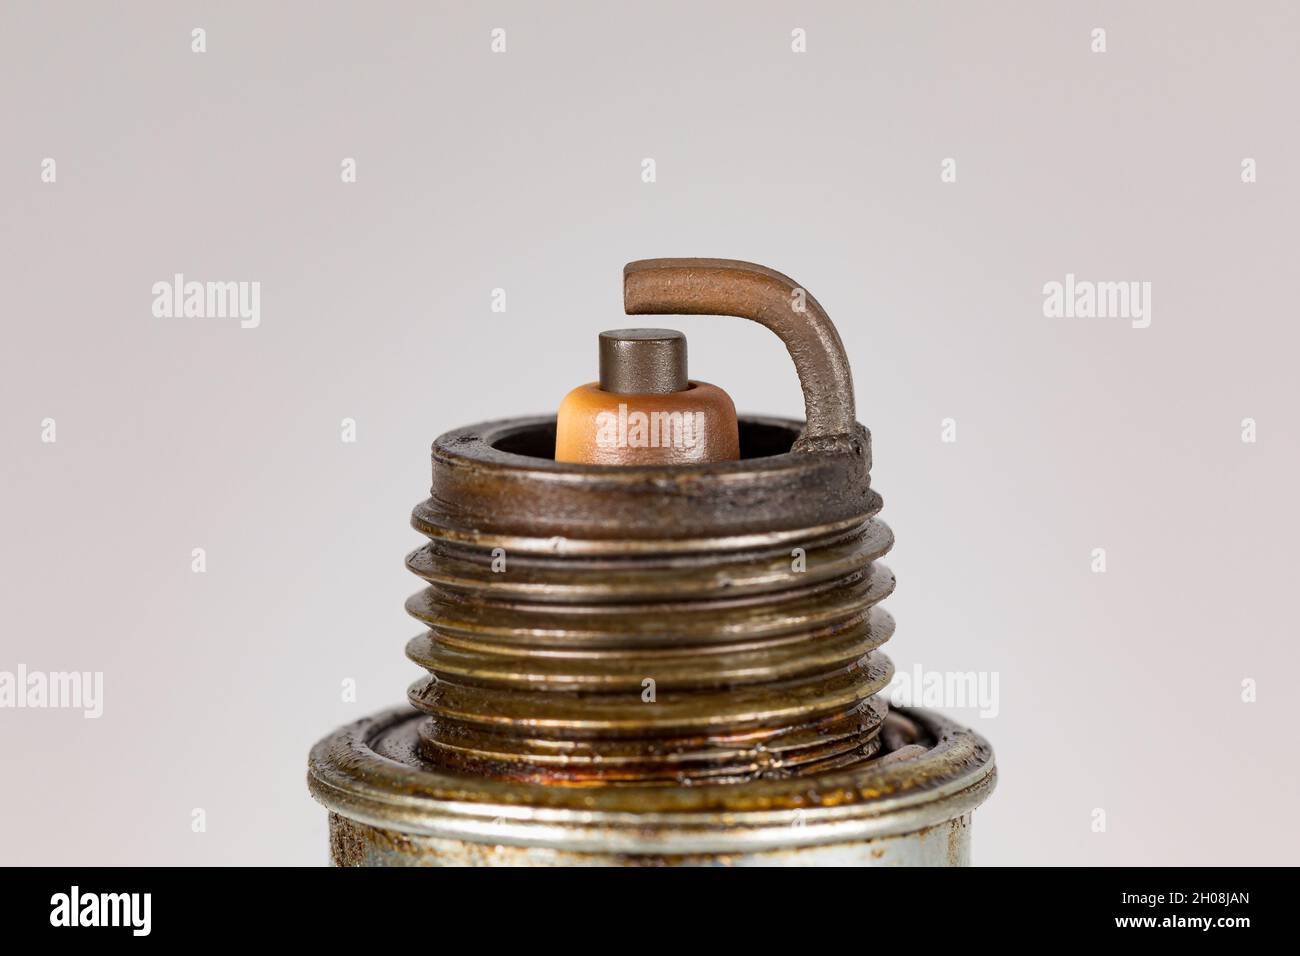 Vehicle engine spark plug isolated on white background. Automotive and small engine repair, maintenance and service concept Stock Photo